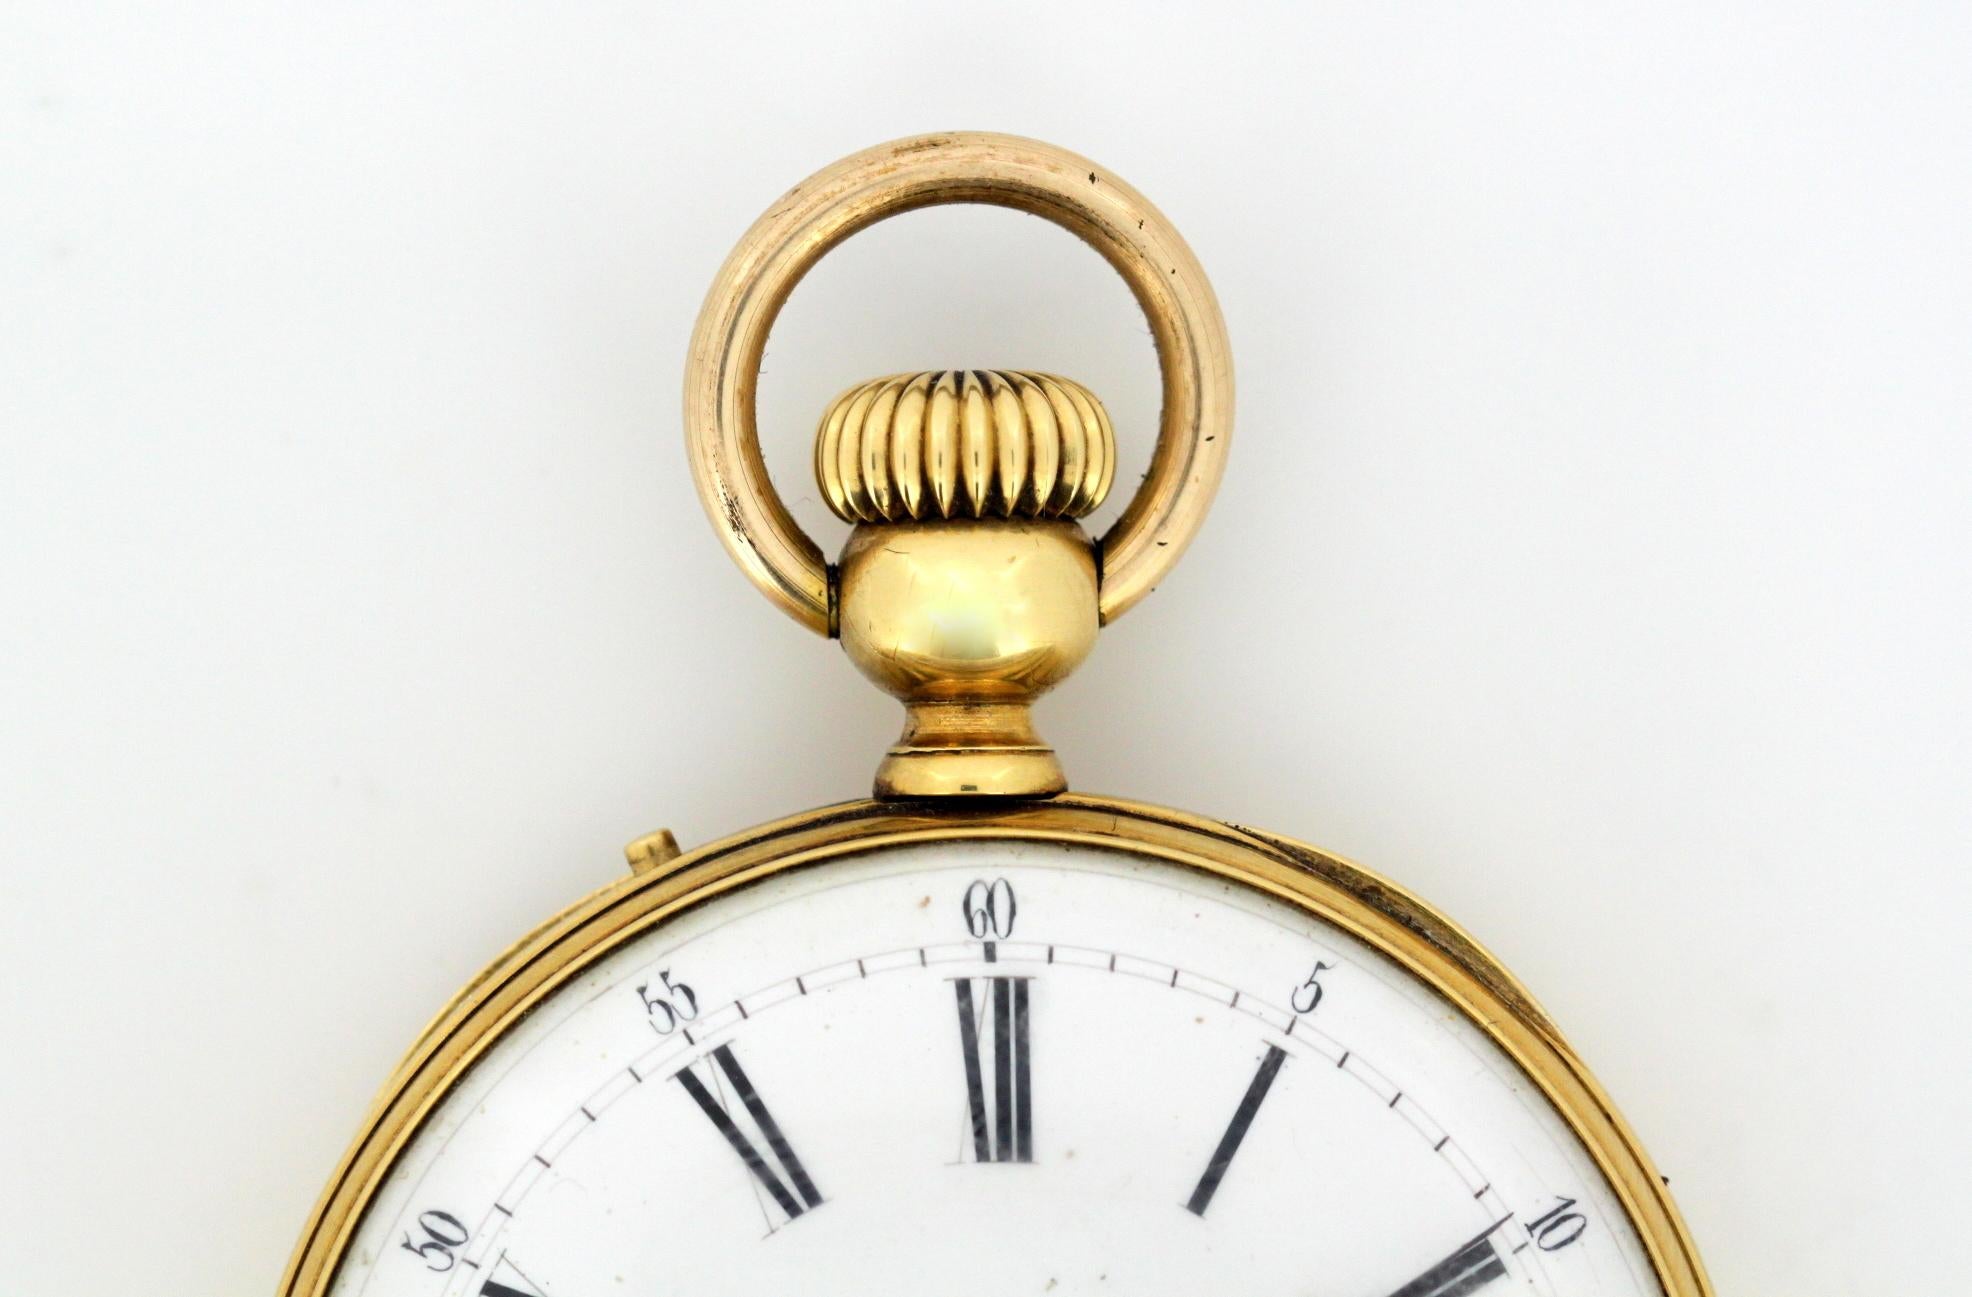 An antique Swiss 18k yellow gold pocket watch by Amore Spiral Breguet. 

Made in Switzerland Circa 1920's.

Dimensions - 
Pocket watch size : 6.8 x 4.8 x 1.2 cm
Weight : 82 grams

Condition : Plexiglass lens has some micro surface grazes, casing has